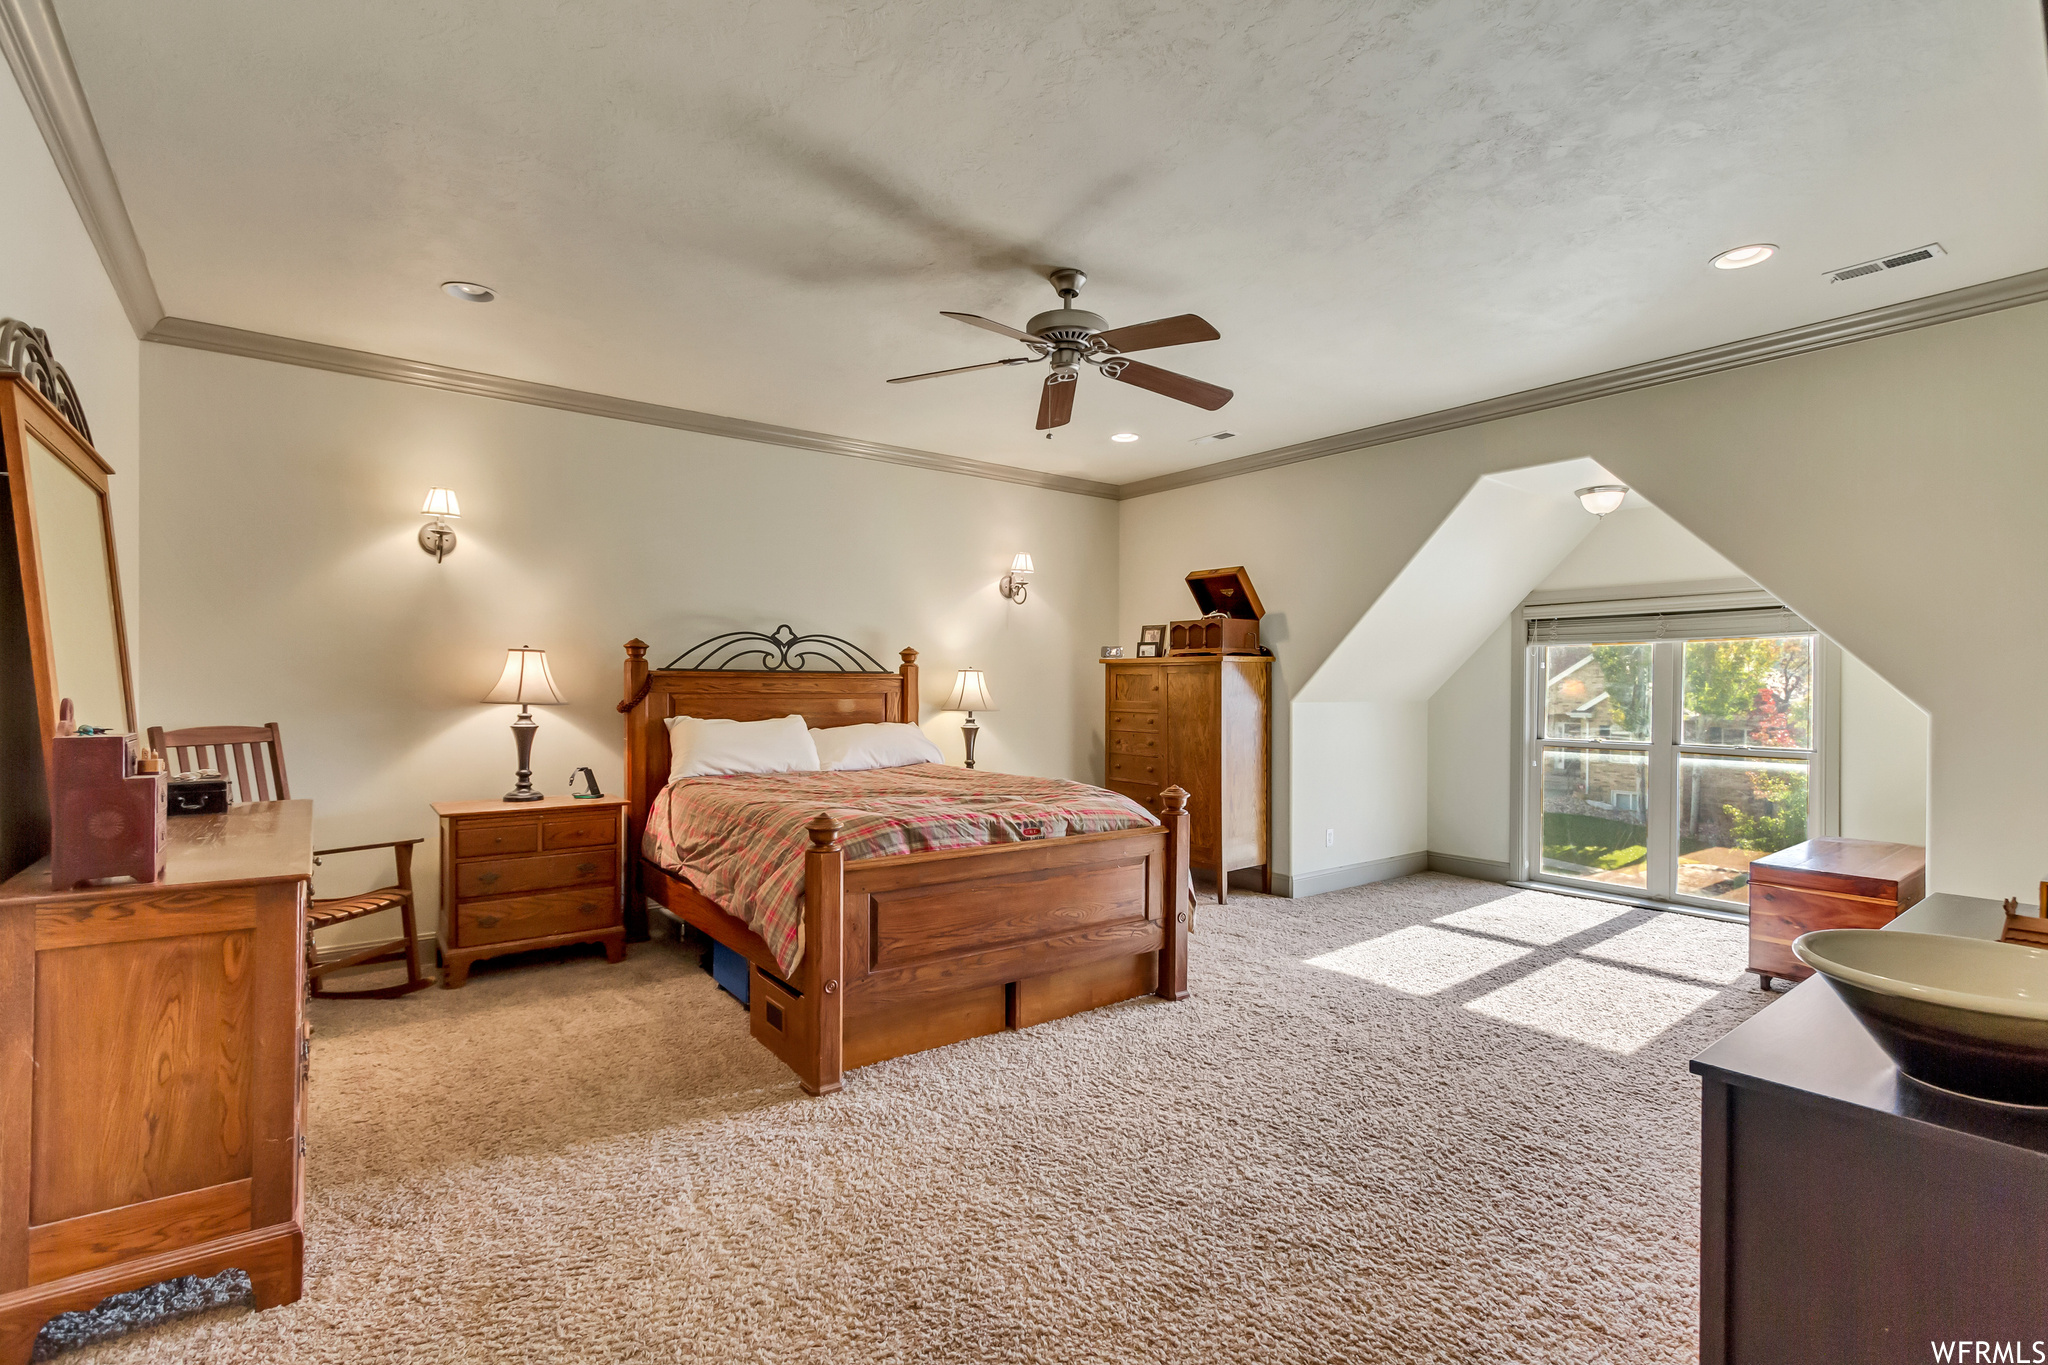 Bedroom featuring ceiling fan, ornamental molding, and light colored carpet